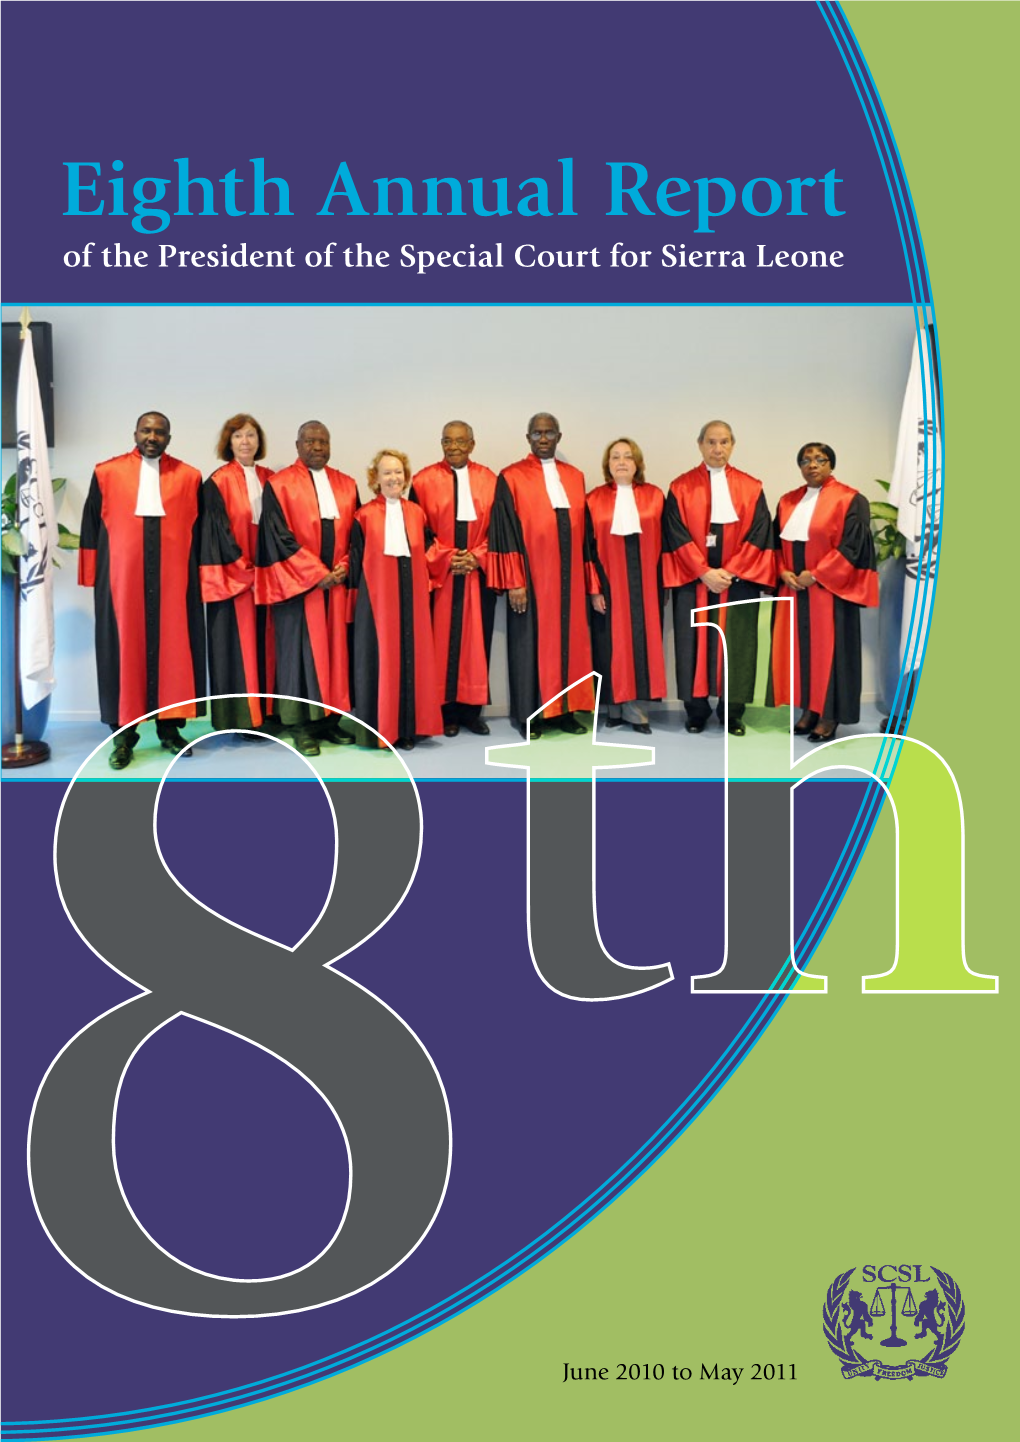 Eighth Annual Report of the President of the Special Court for Sierra Leone